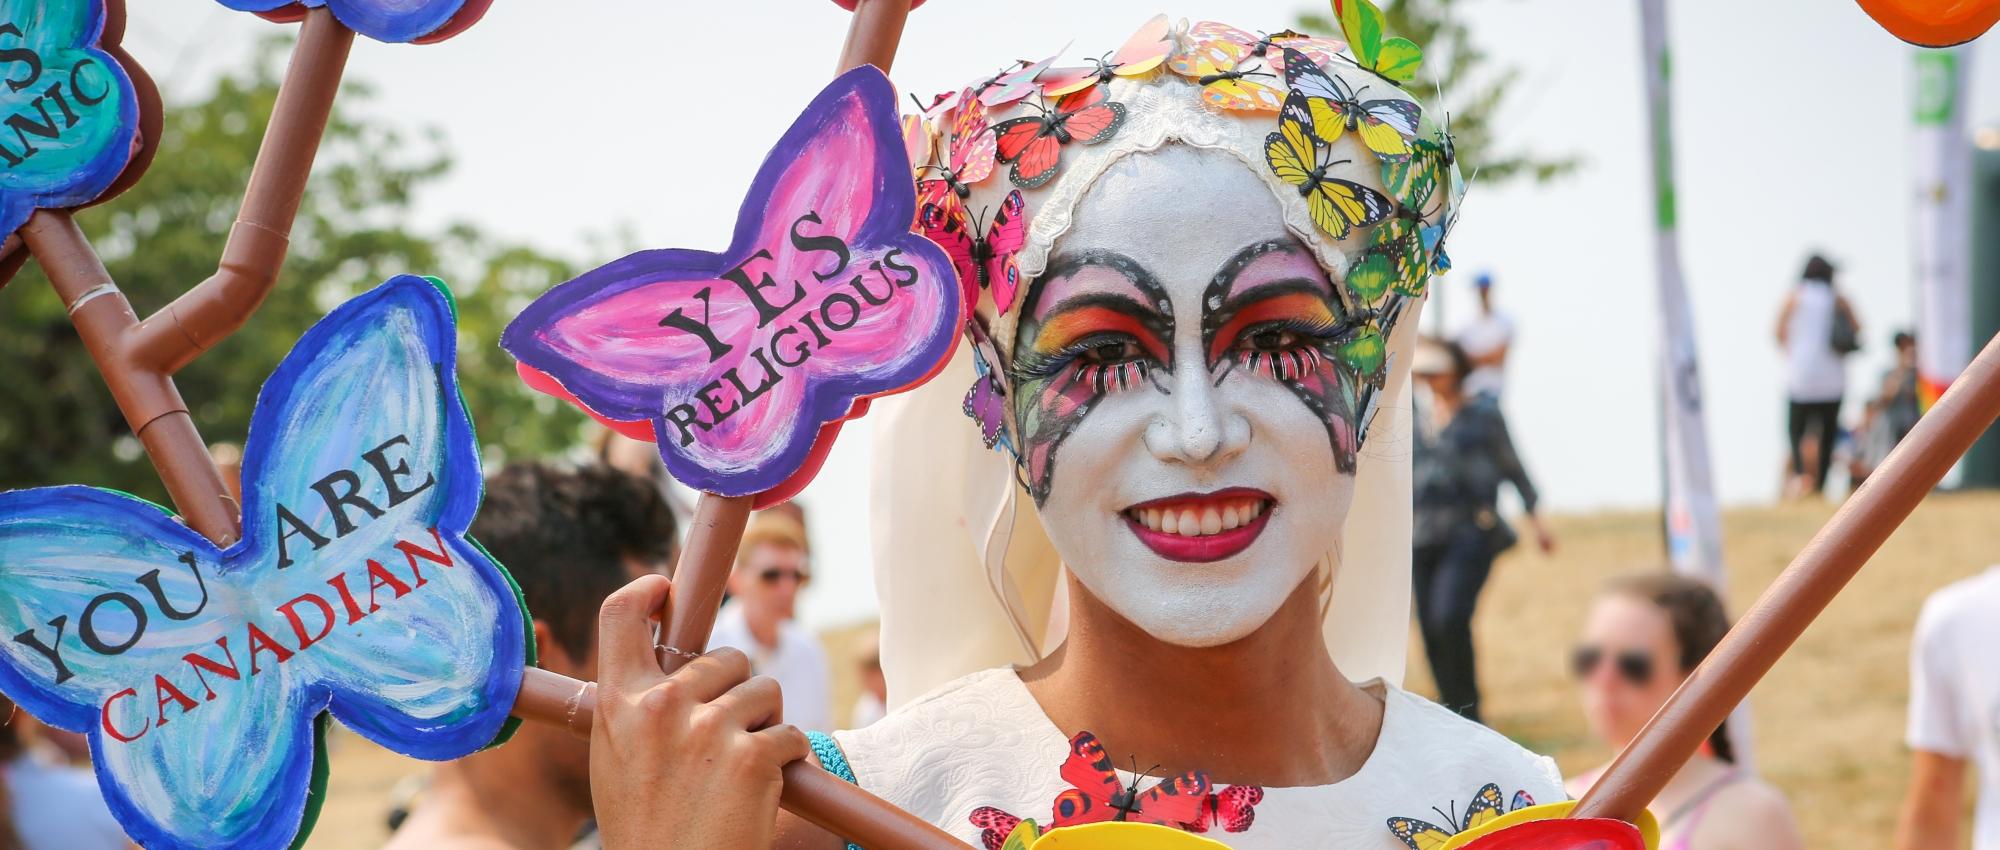 A man in white makeup decorated with colourful butterflies at a beach during a Pride celebration.